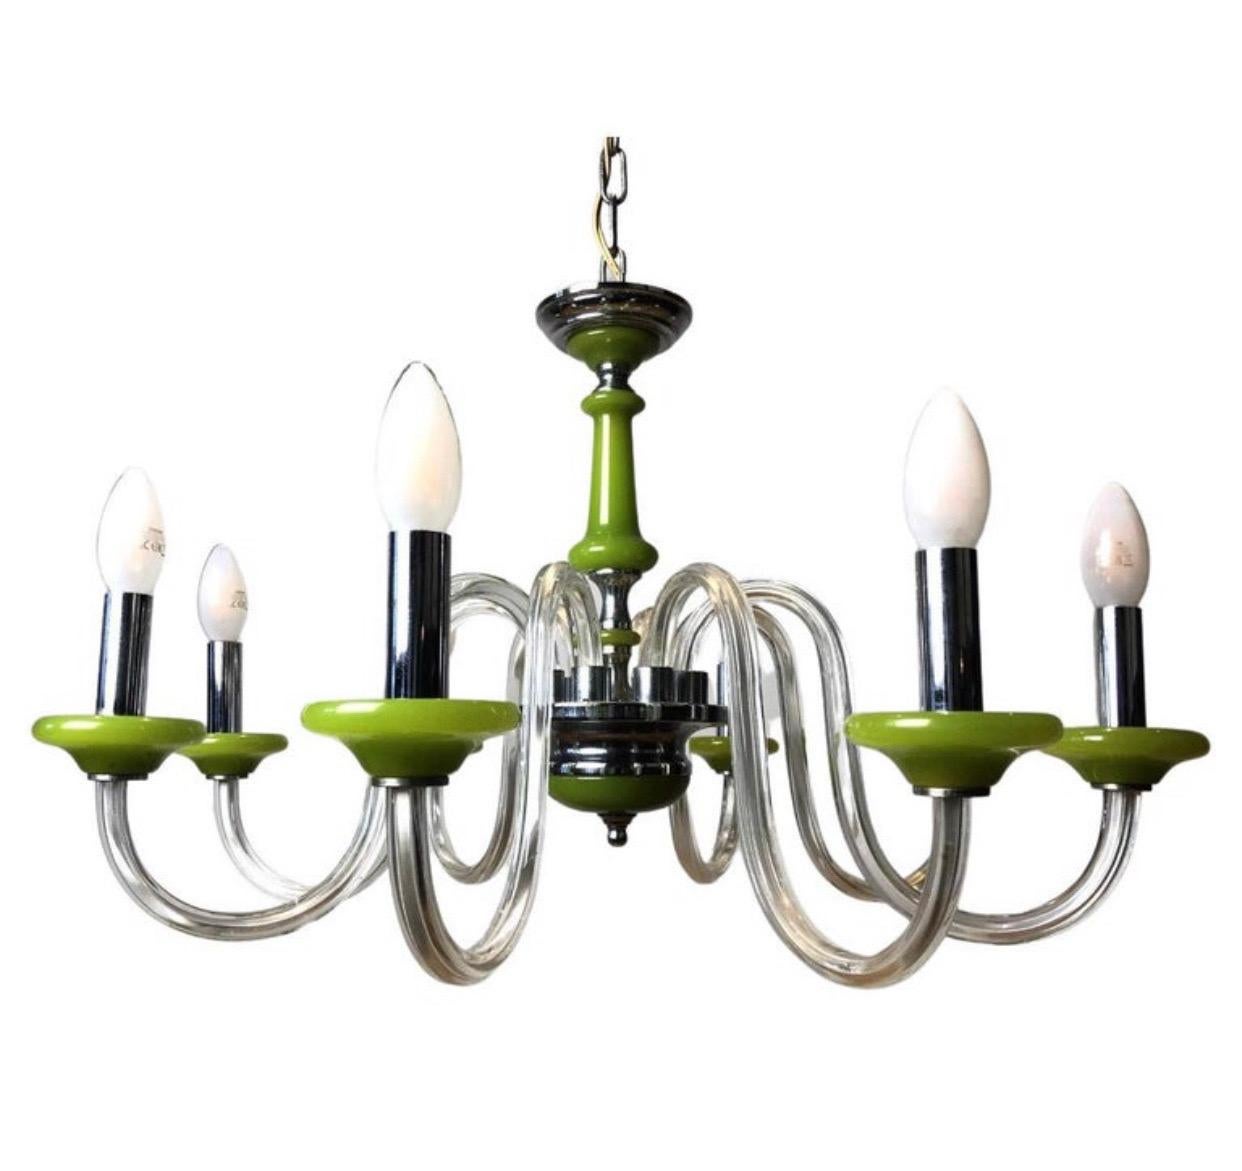 Blue Turquoise Murano Glass Chandelier, Italy, Mid-20th Century For Sale 9